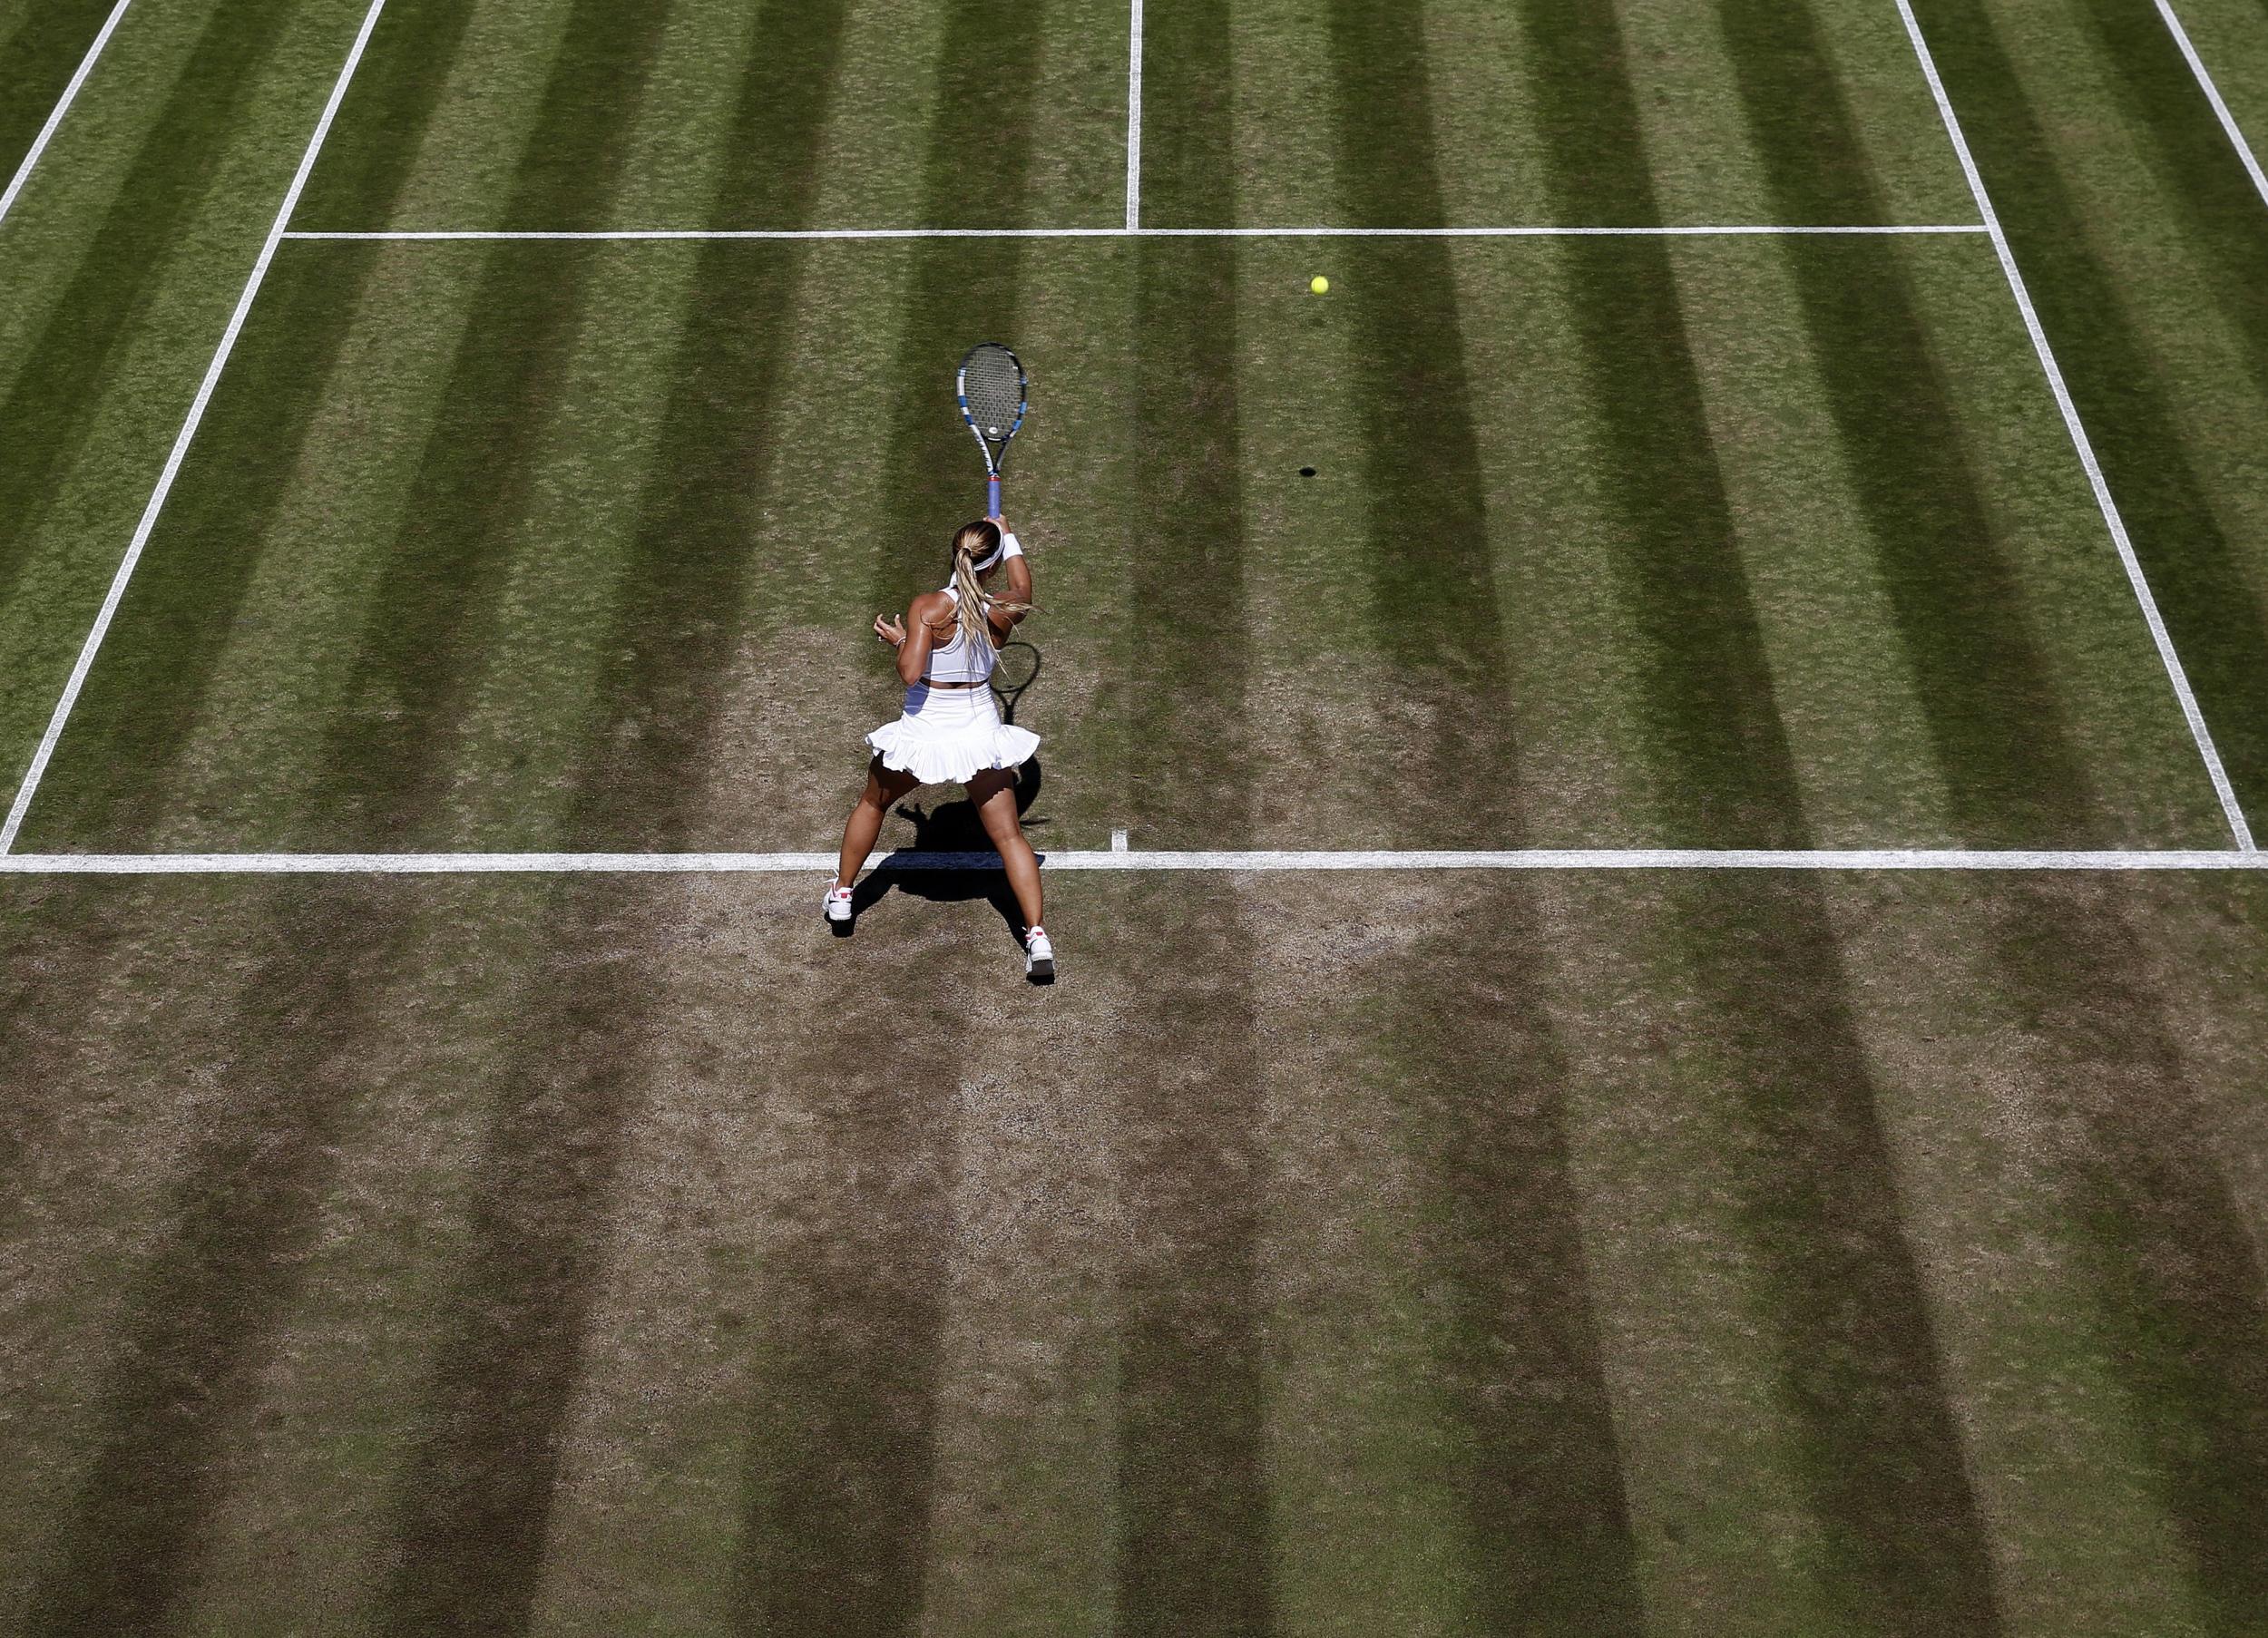 A number of players have criticised the condition of the courts at this year's Championships